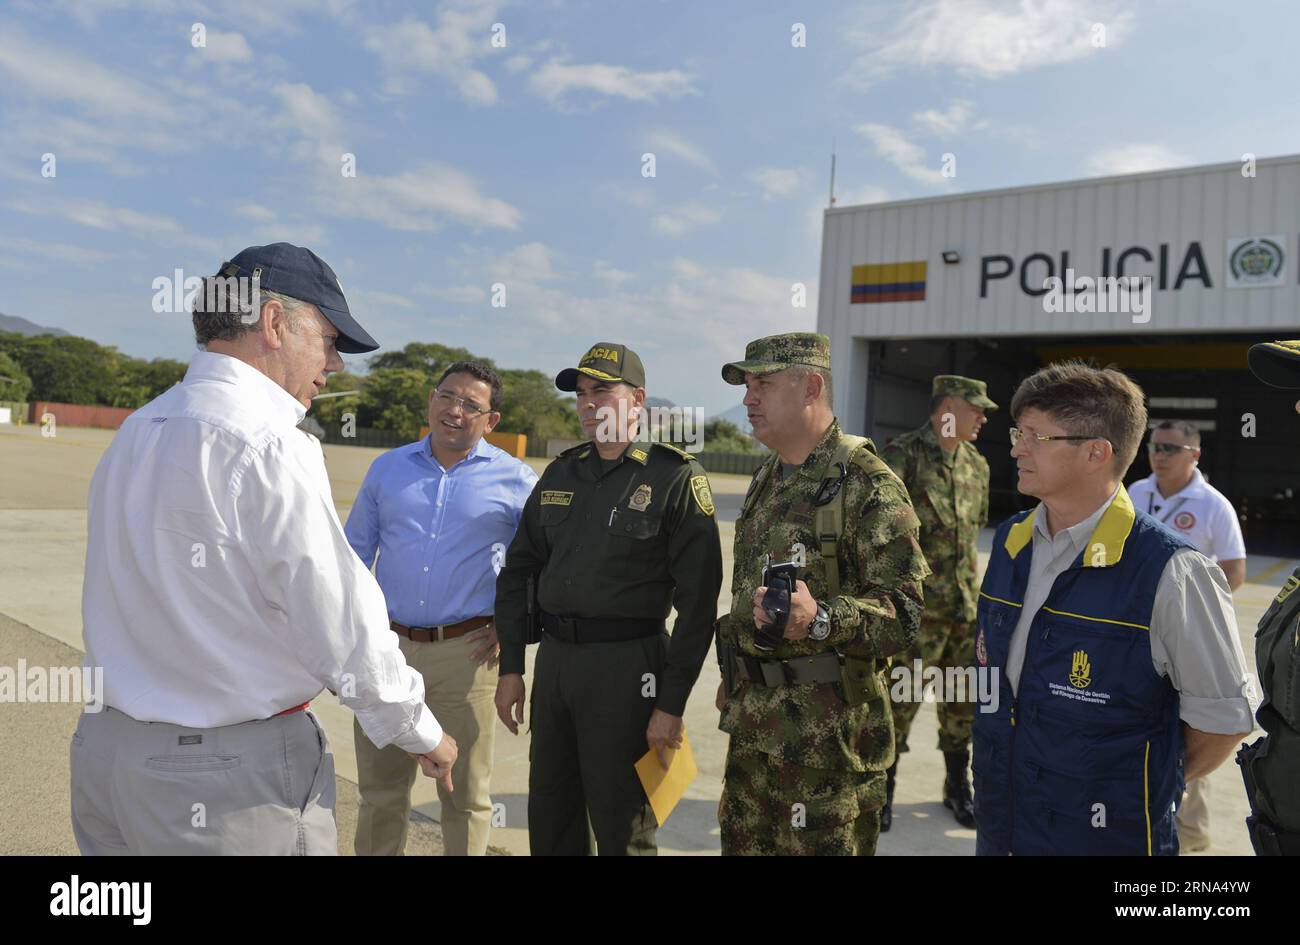 (160106) -- SANTA MARTA, Jan. 6, 2016 -- Image provided by Colombia s Presidency shows Colombian President Juan Manuel Santos (1st L) being received by the Santa Marta Mayor Rafael Alejandro Martinez (2nd L), region Police and Army Commanders, and the Director of the Unit for Disaster Risk Management (UNGRD, for its acronym in Spanish) Carlos Ivan Marquez Perez (1st R), prior the meeting of pursuit the plans to face El Nino Phenomenon, in Santa Marta, Colombia, Jan. 6, 2016. Colombian President Juan Manuel Santos led the meeting in which the plans to face El Nino Phenomenon were evaluated, and Stock Photo